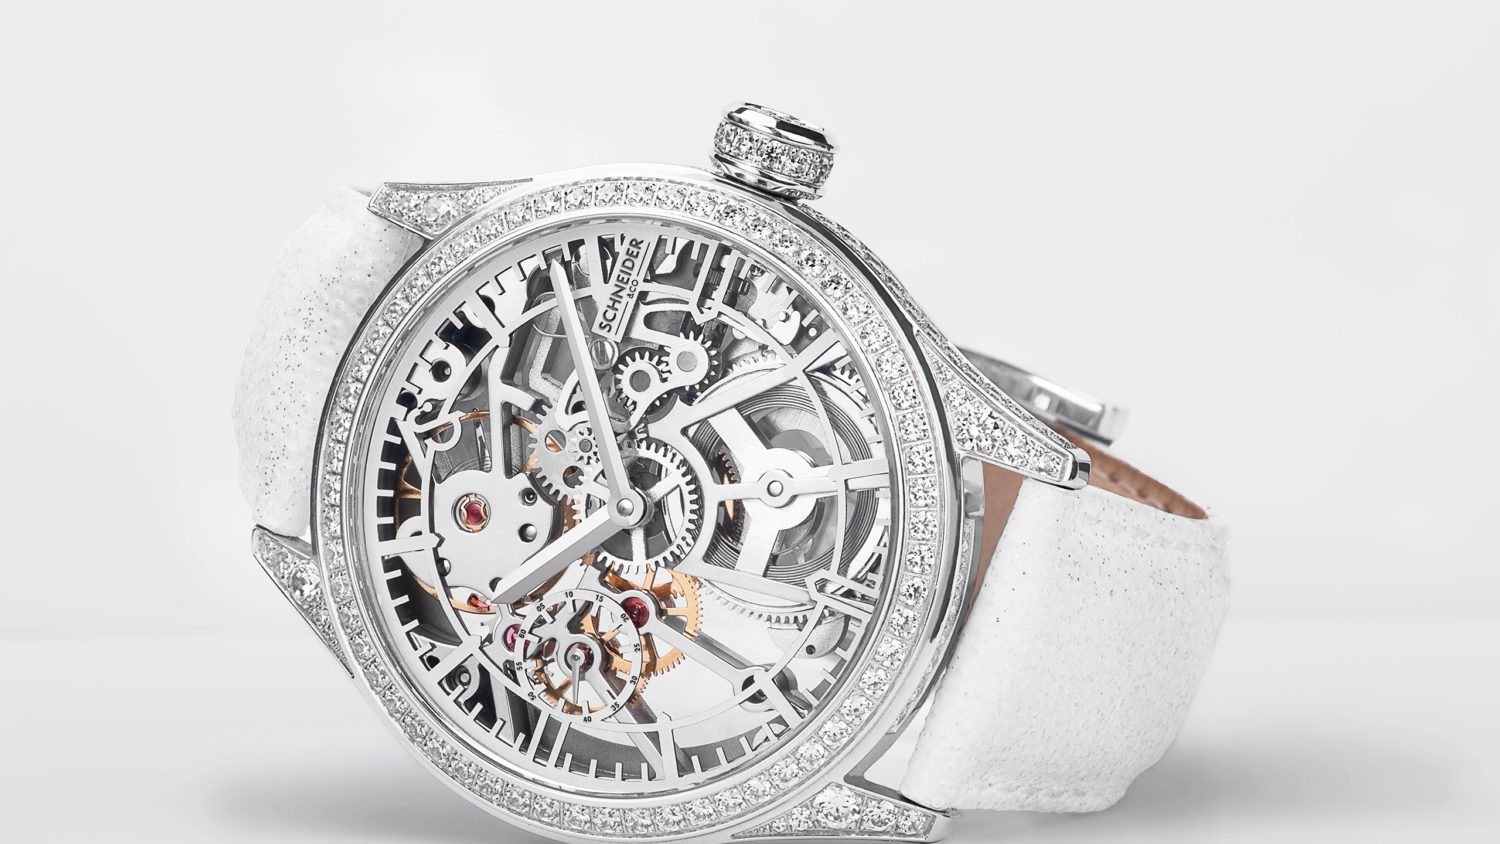 The centerpiece of our ladies' collection, Dynasty represents the most sophisticated of our creations.